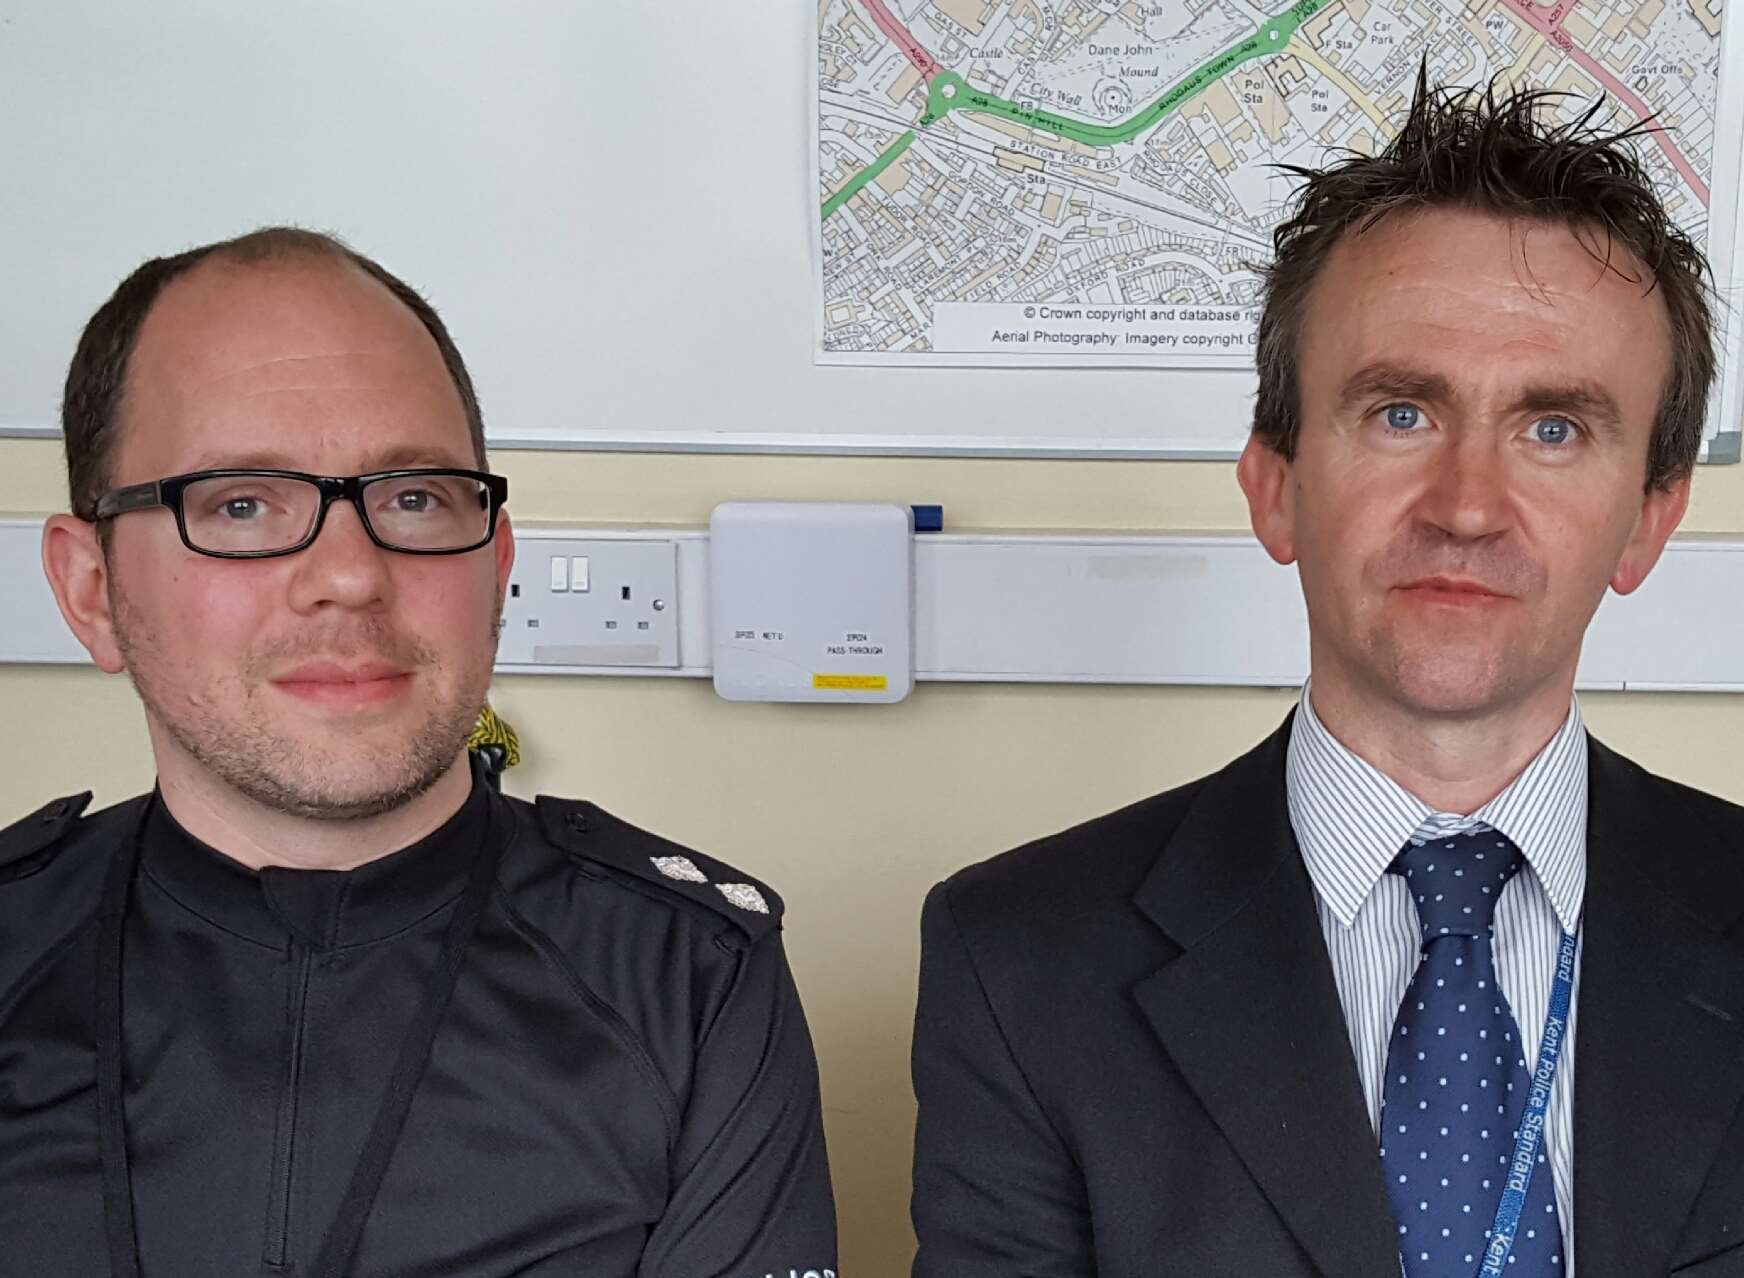 DI Andy Bidmead (left) and DS Richard Lown led the Richard Fearnside missing person investigation